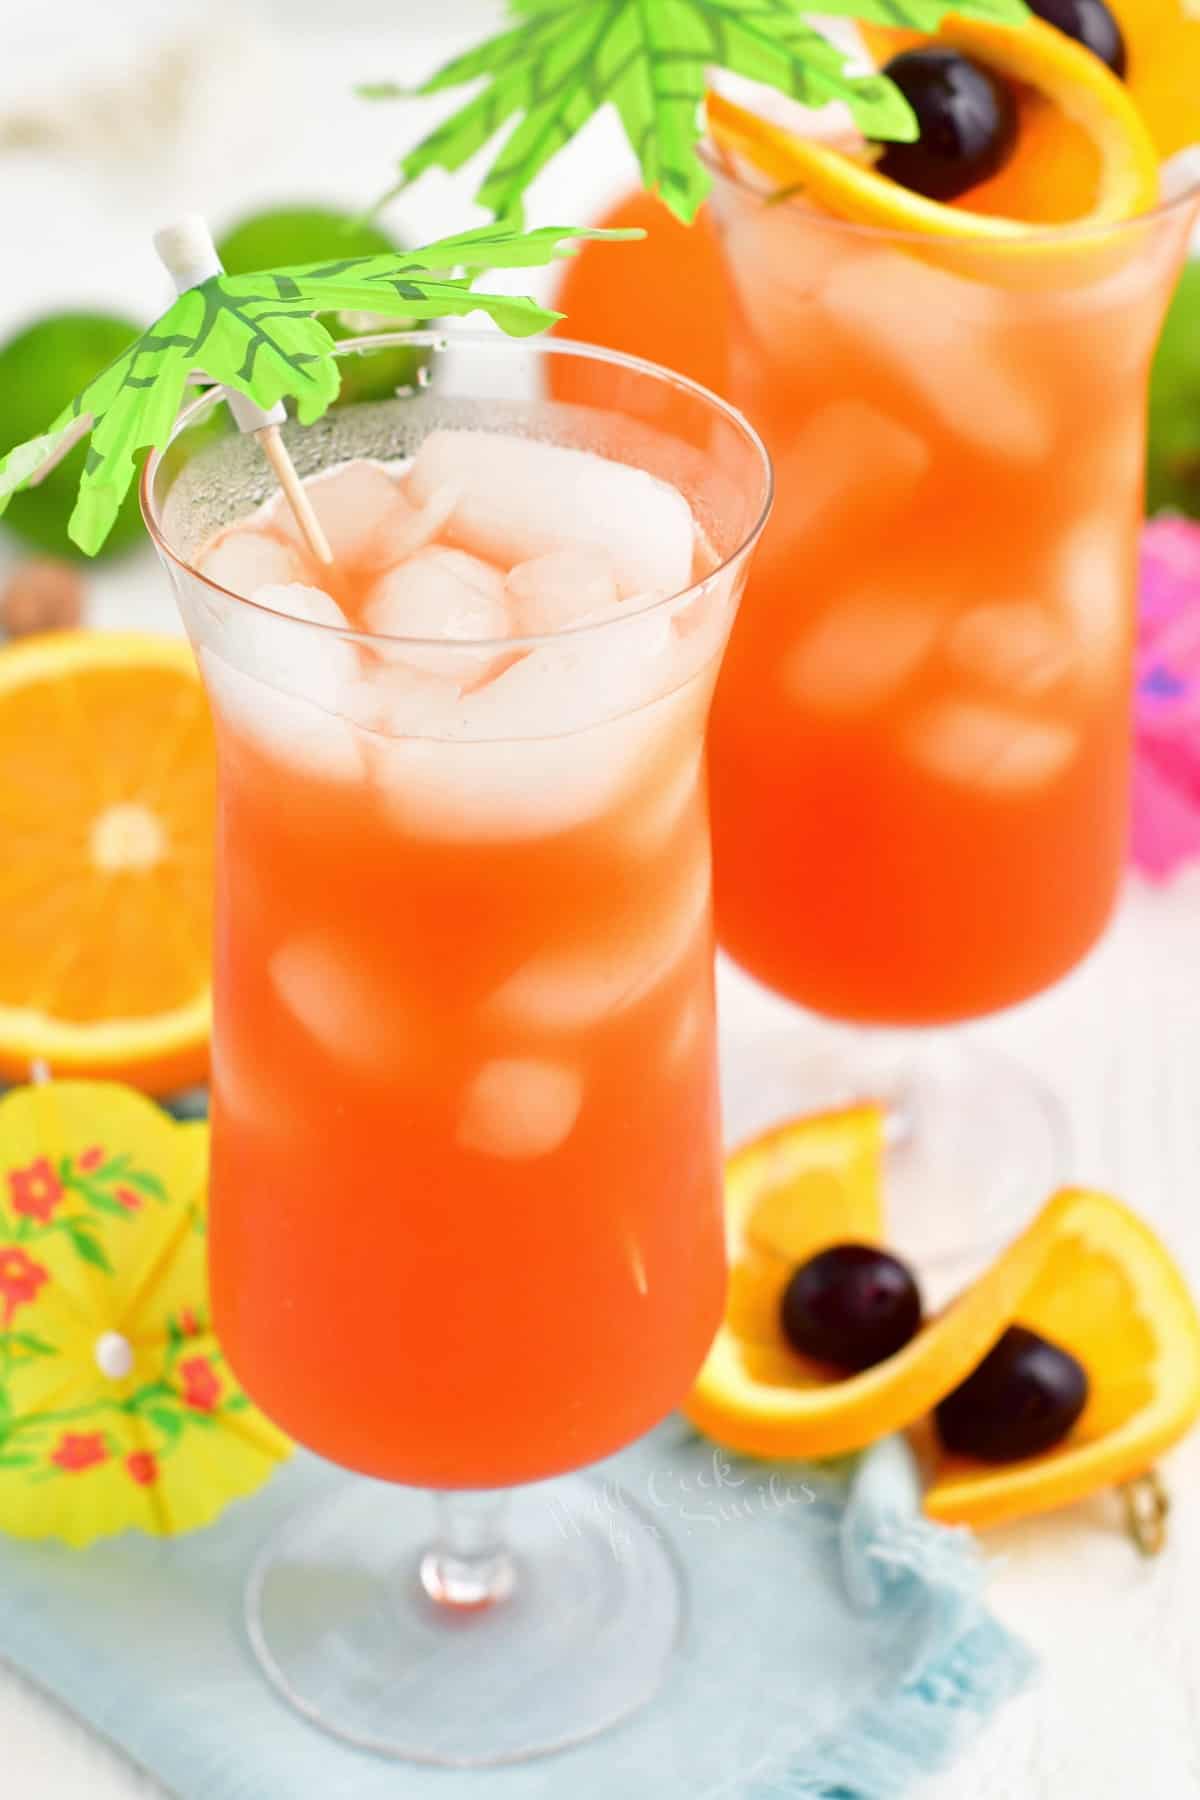 Rum Punch Easy Tropical Cocktail Recipe That's Sweet and Refreshing!